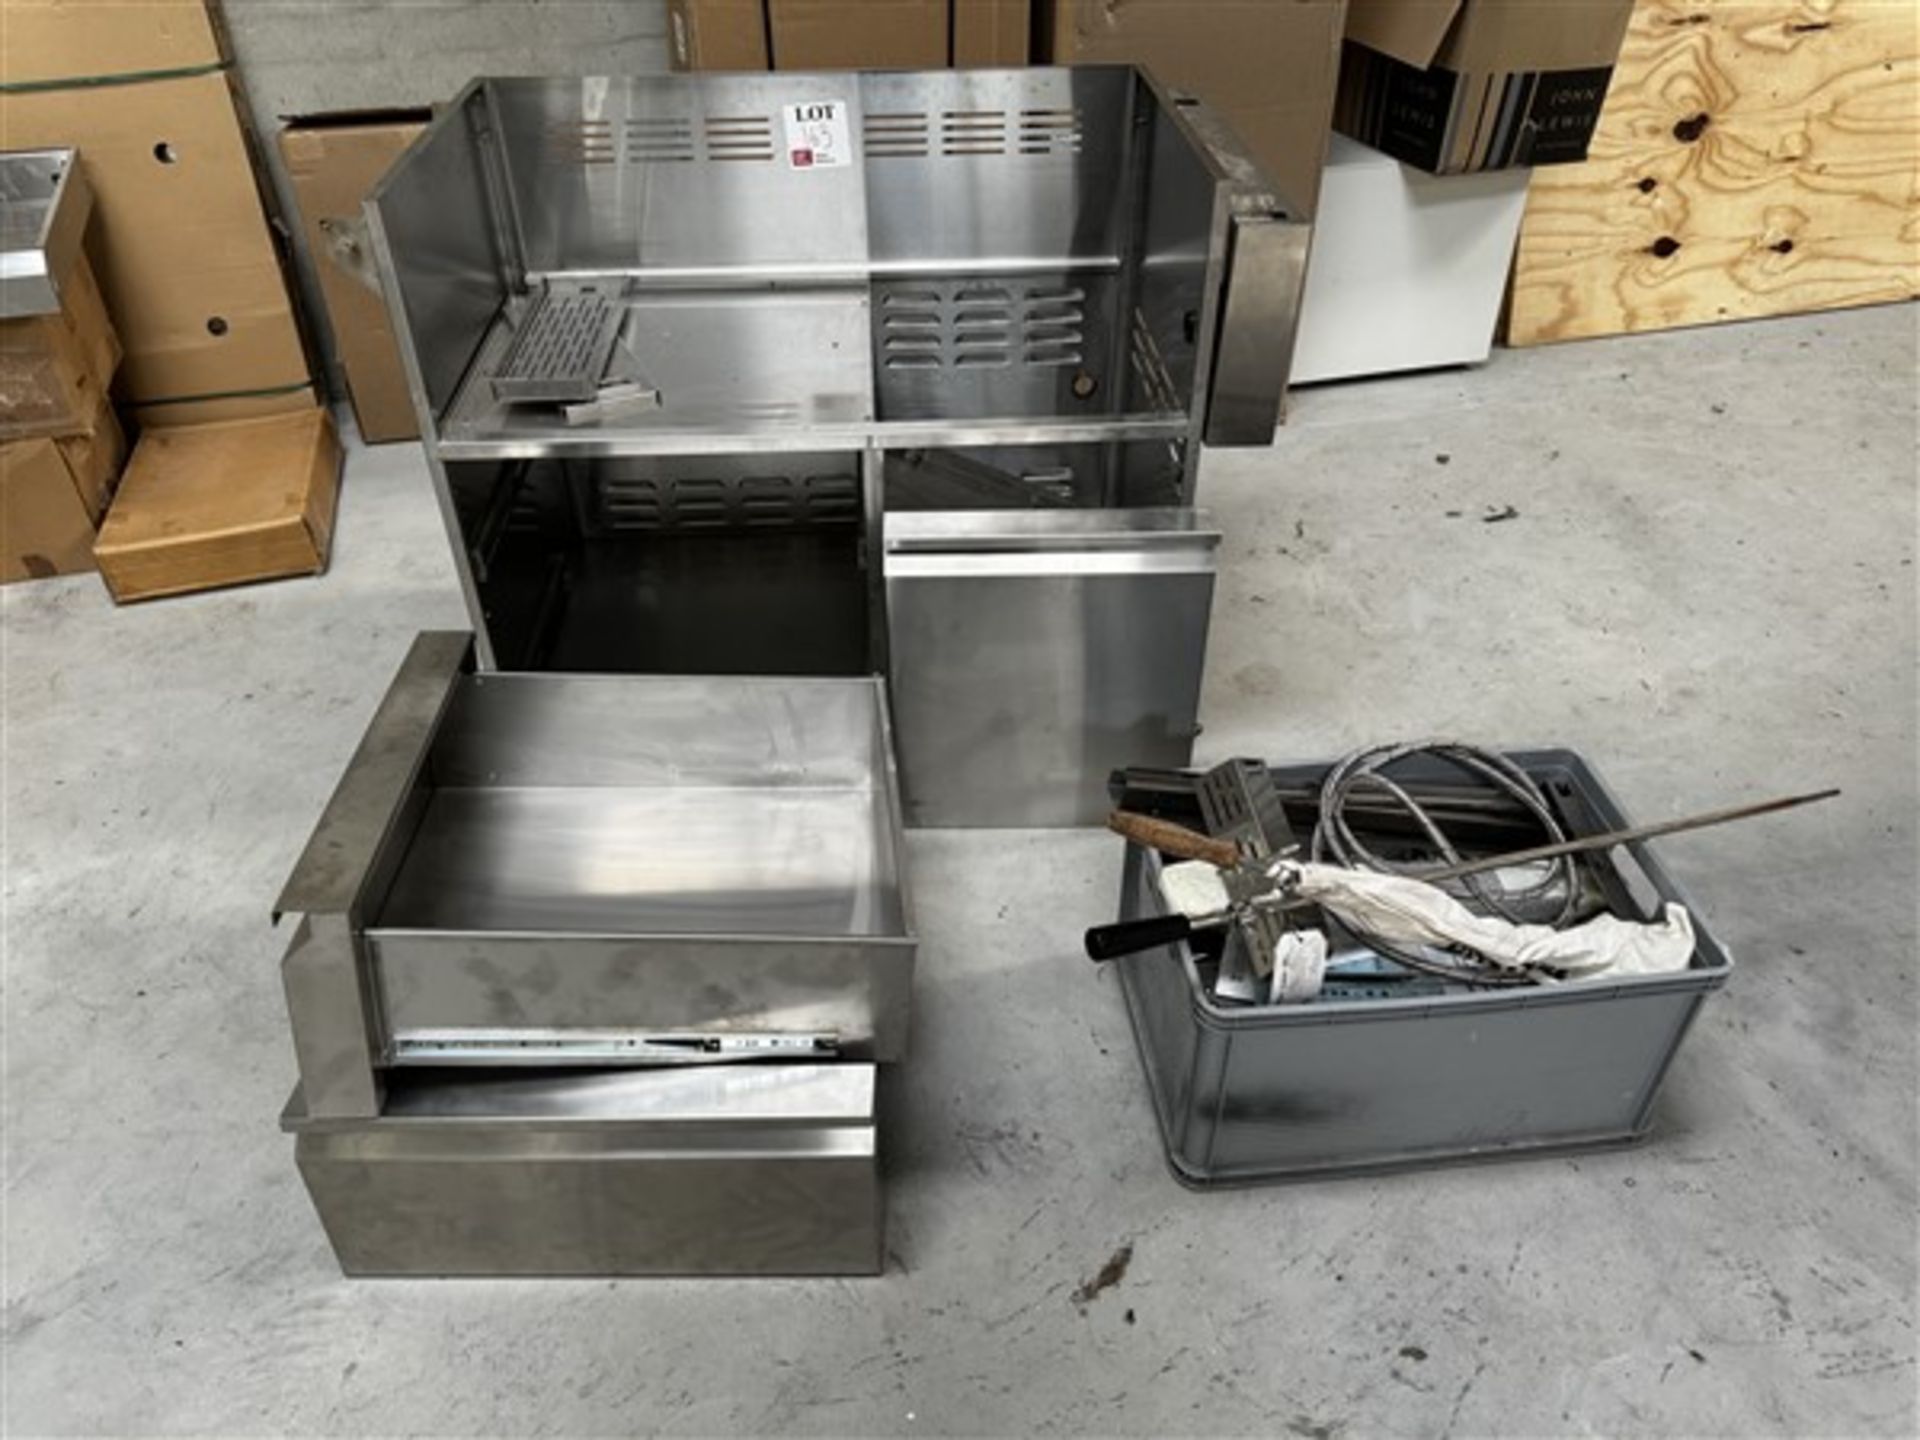 Stainless steel BBQ counter with two shelves/drawers counter dimensions: height 94cm x length 1.3m x